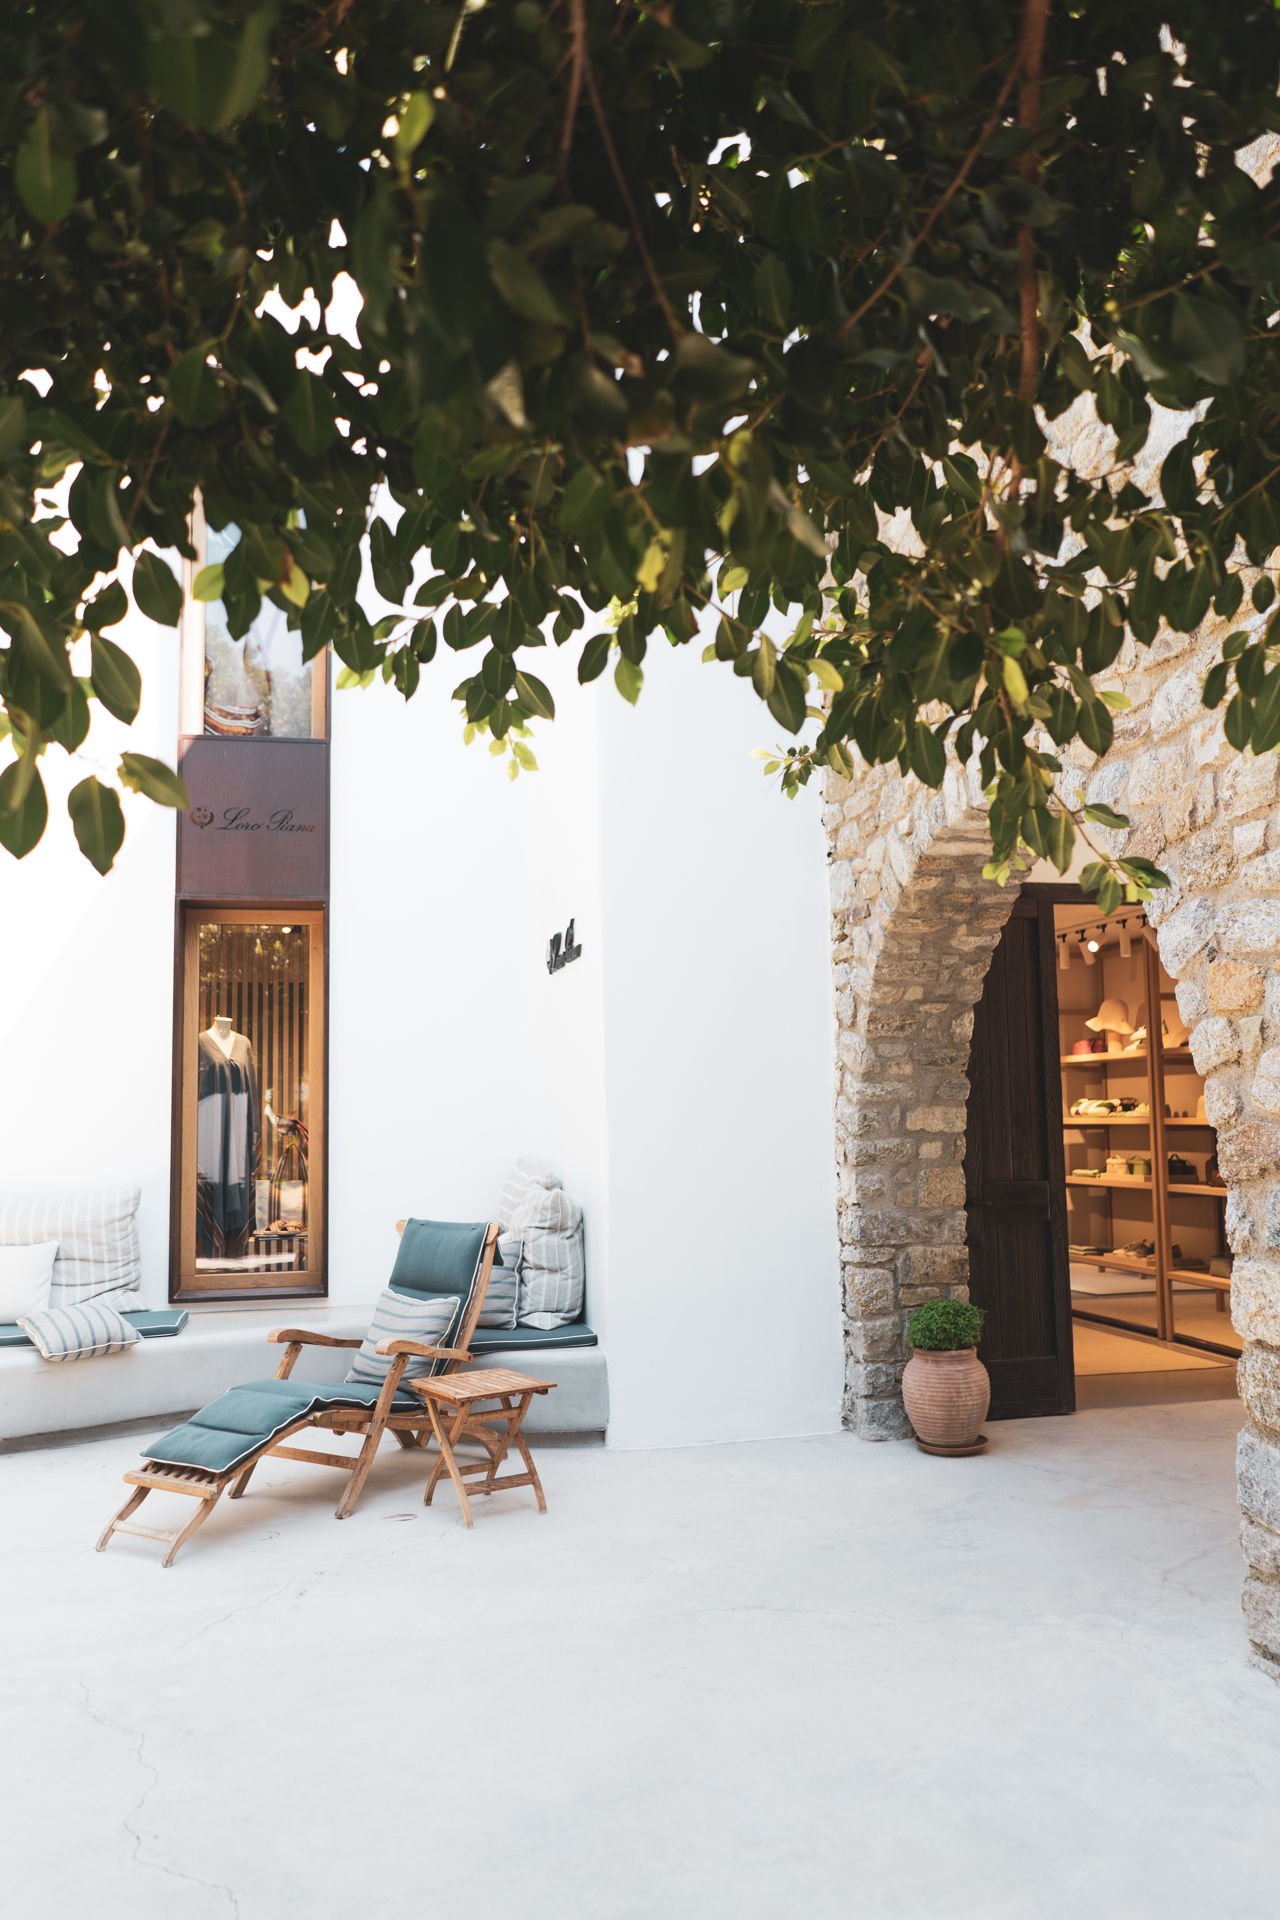 There’s a wide range of shops right by many of Mykonos’ beaches.